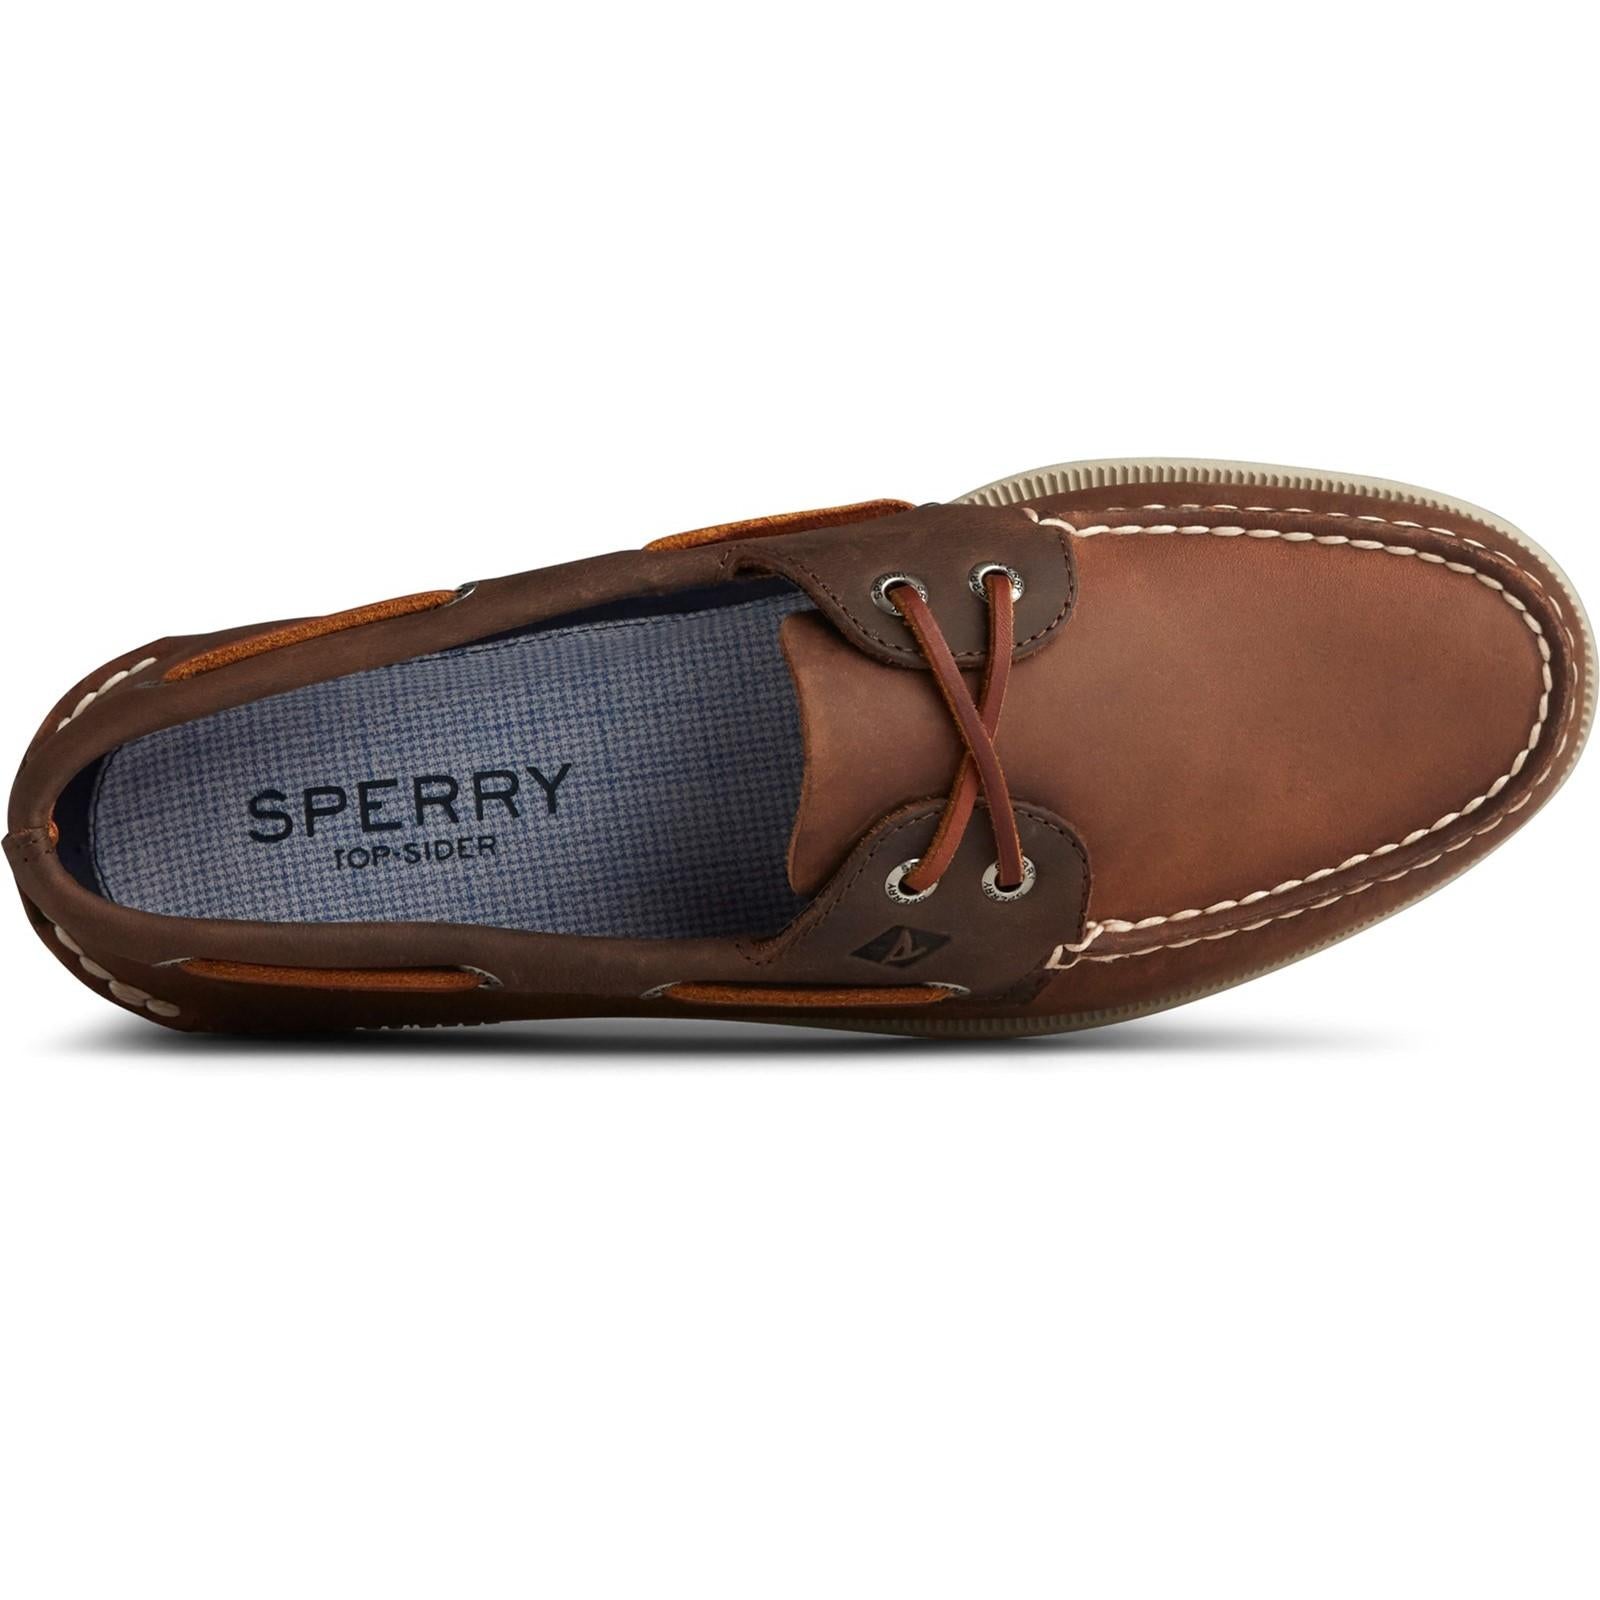 Sperry Top-sider Authentic Original Boat Shoe